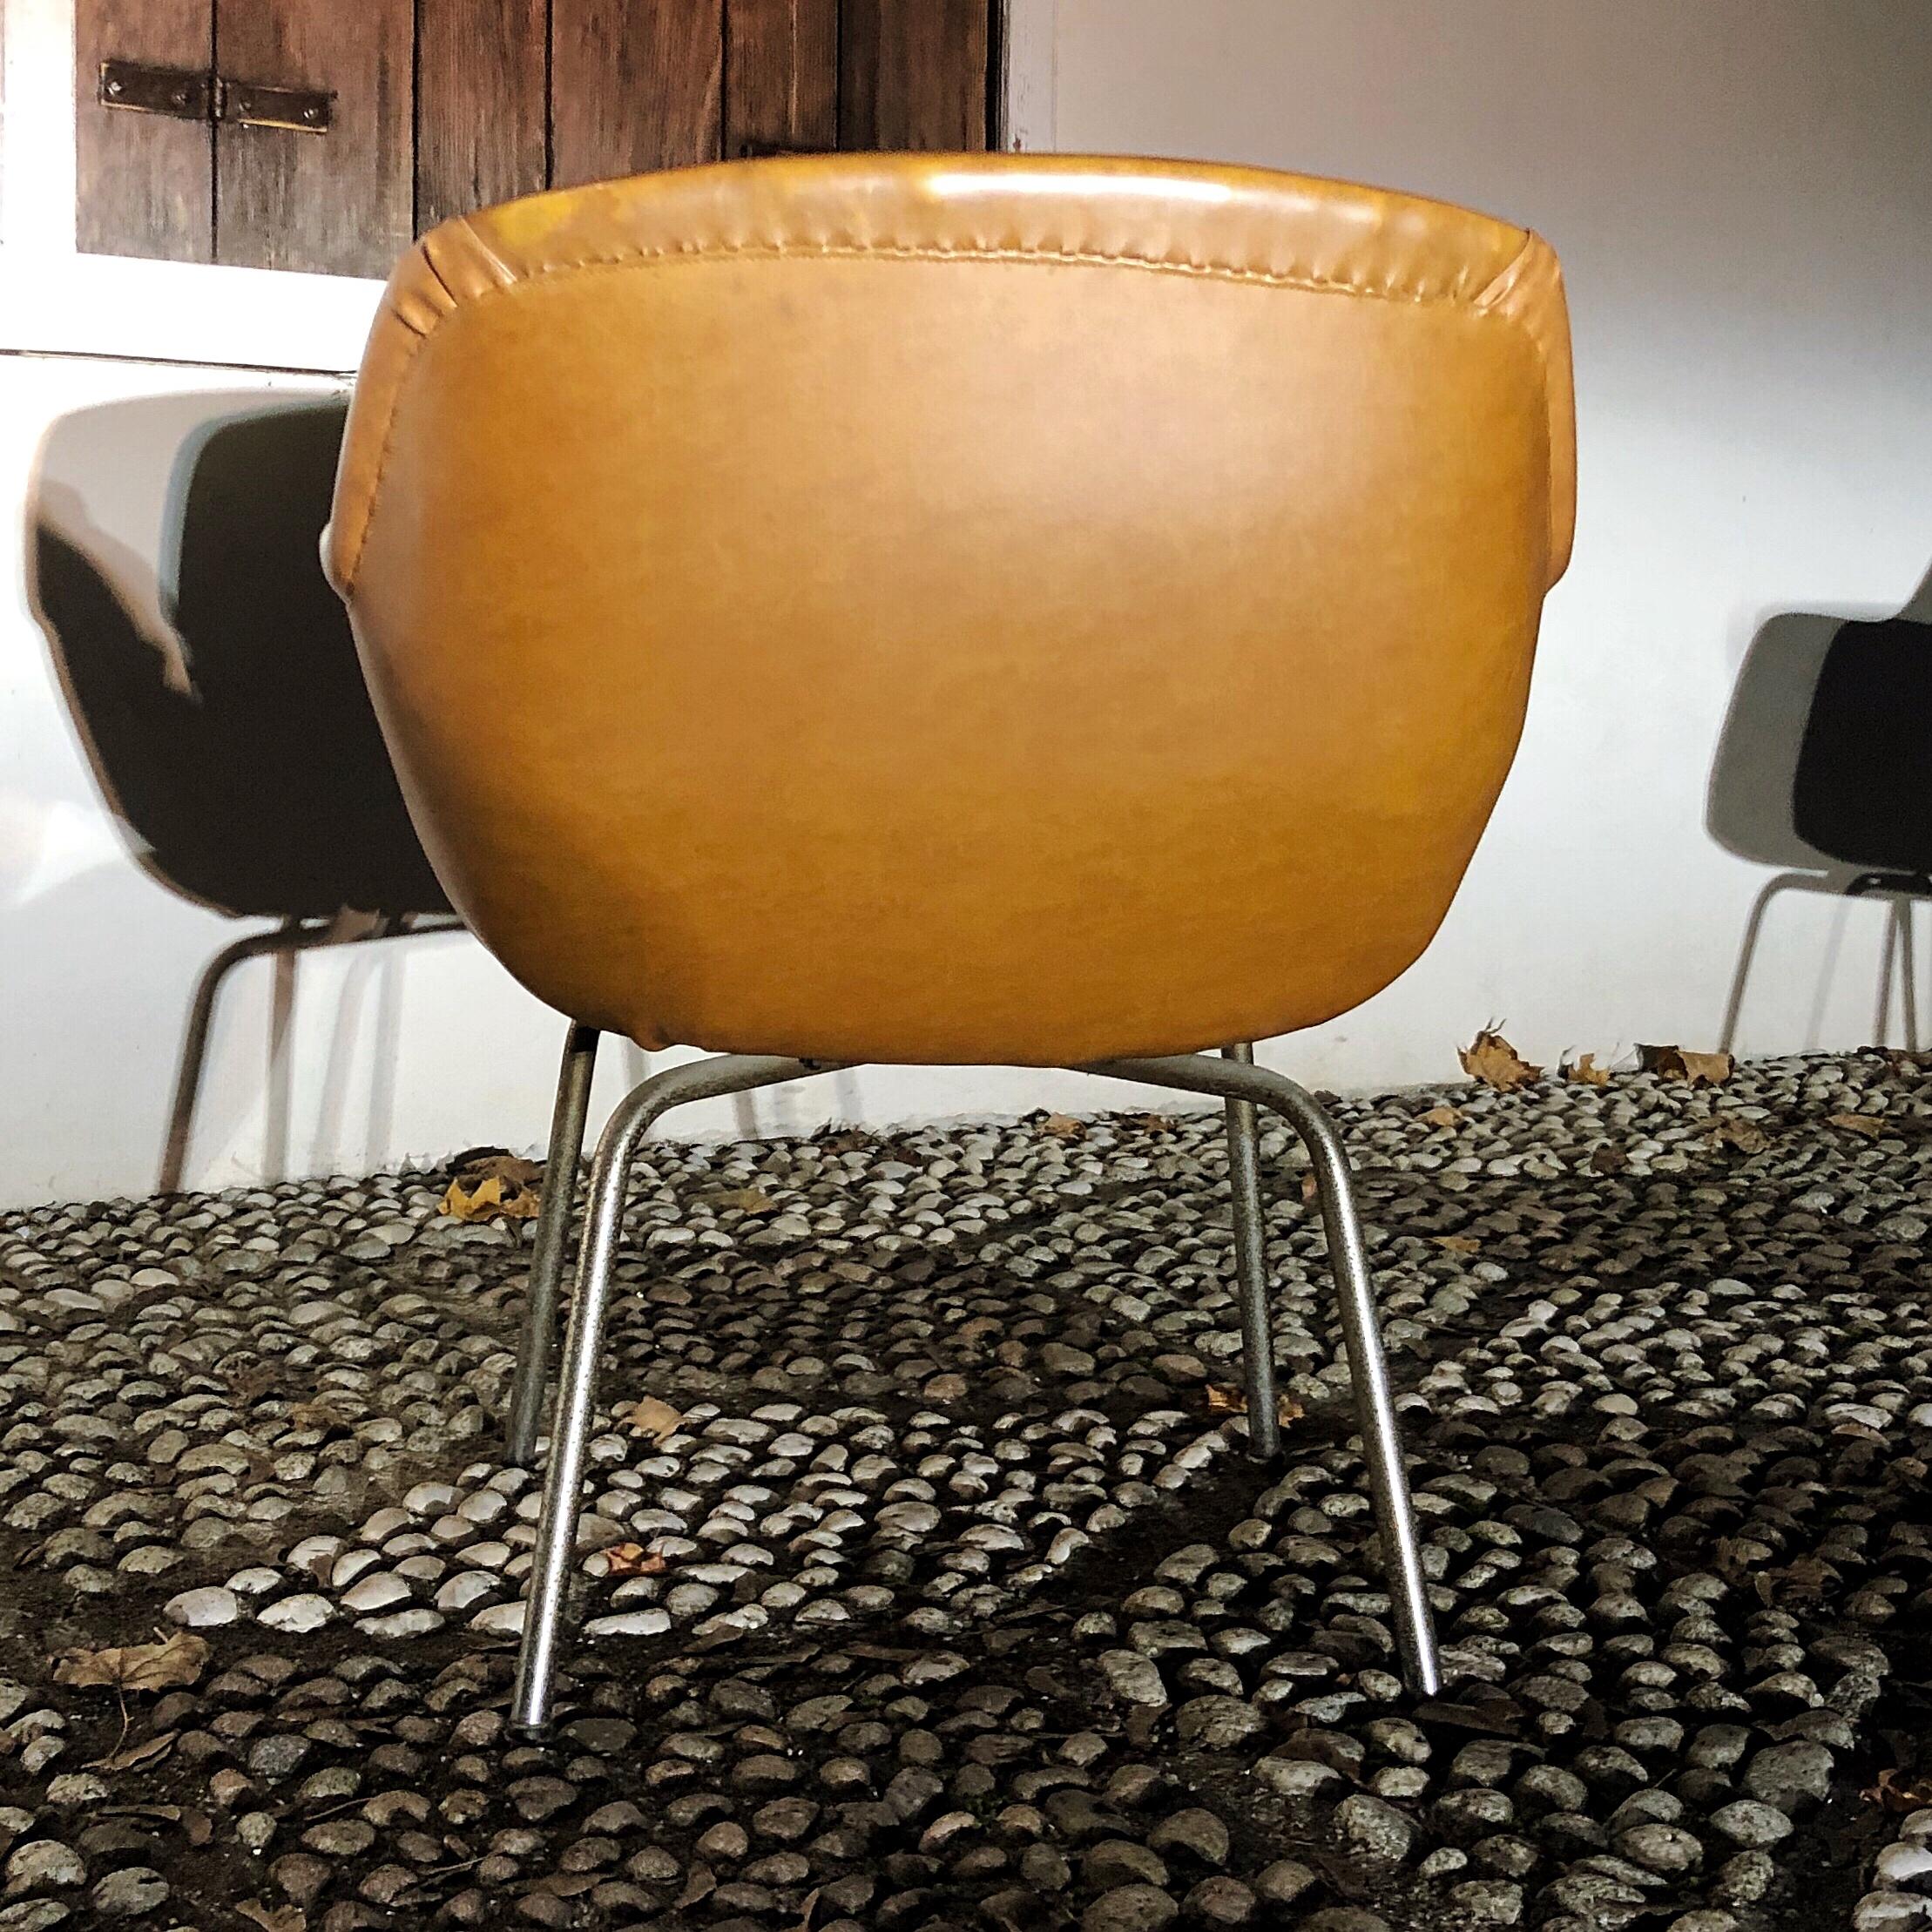 Italian Pair of Midcentury Brown Leather Armchairs in the Style of Arne Jacobsen, 1960s For Sale